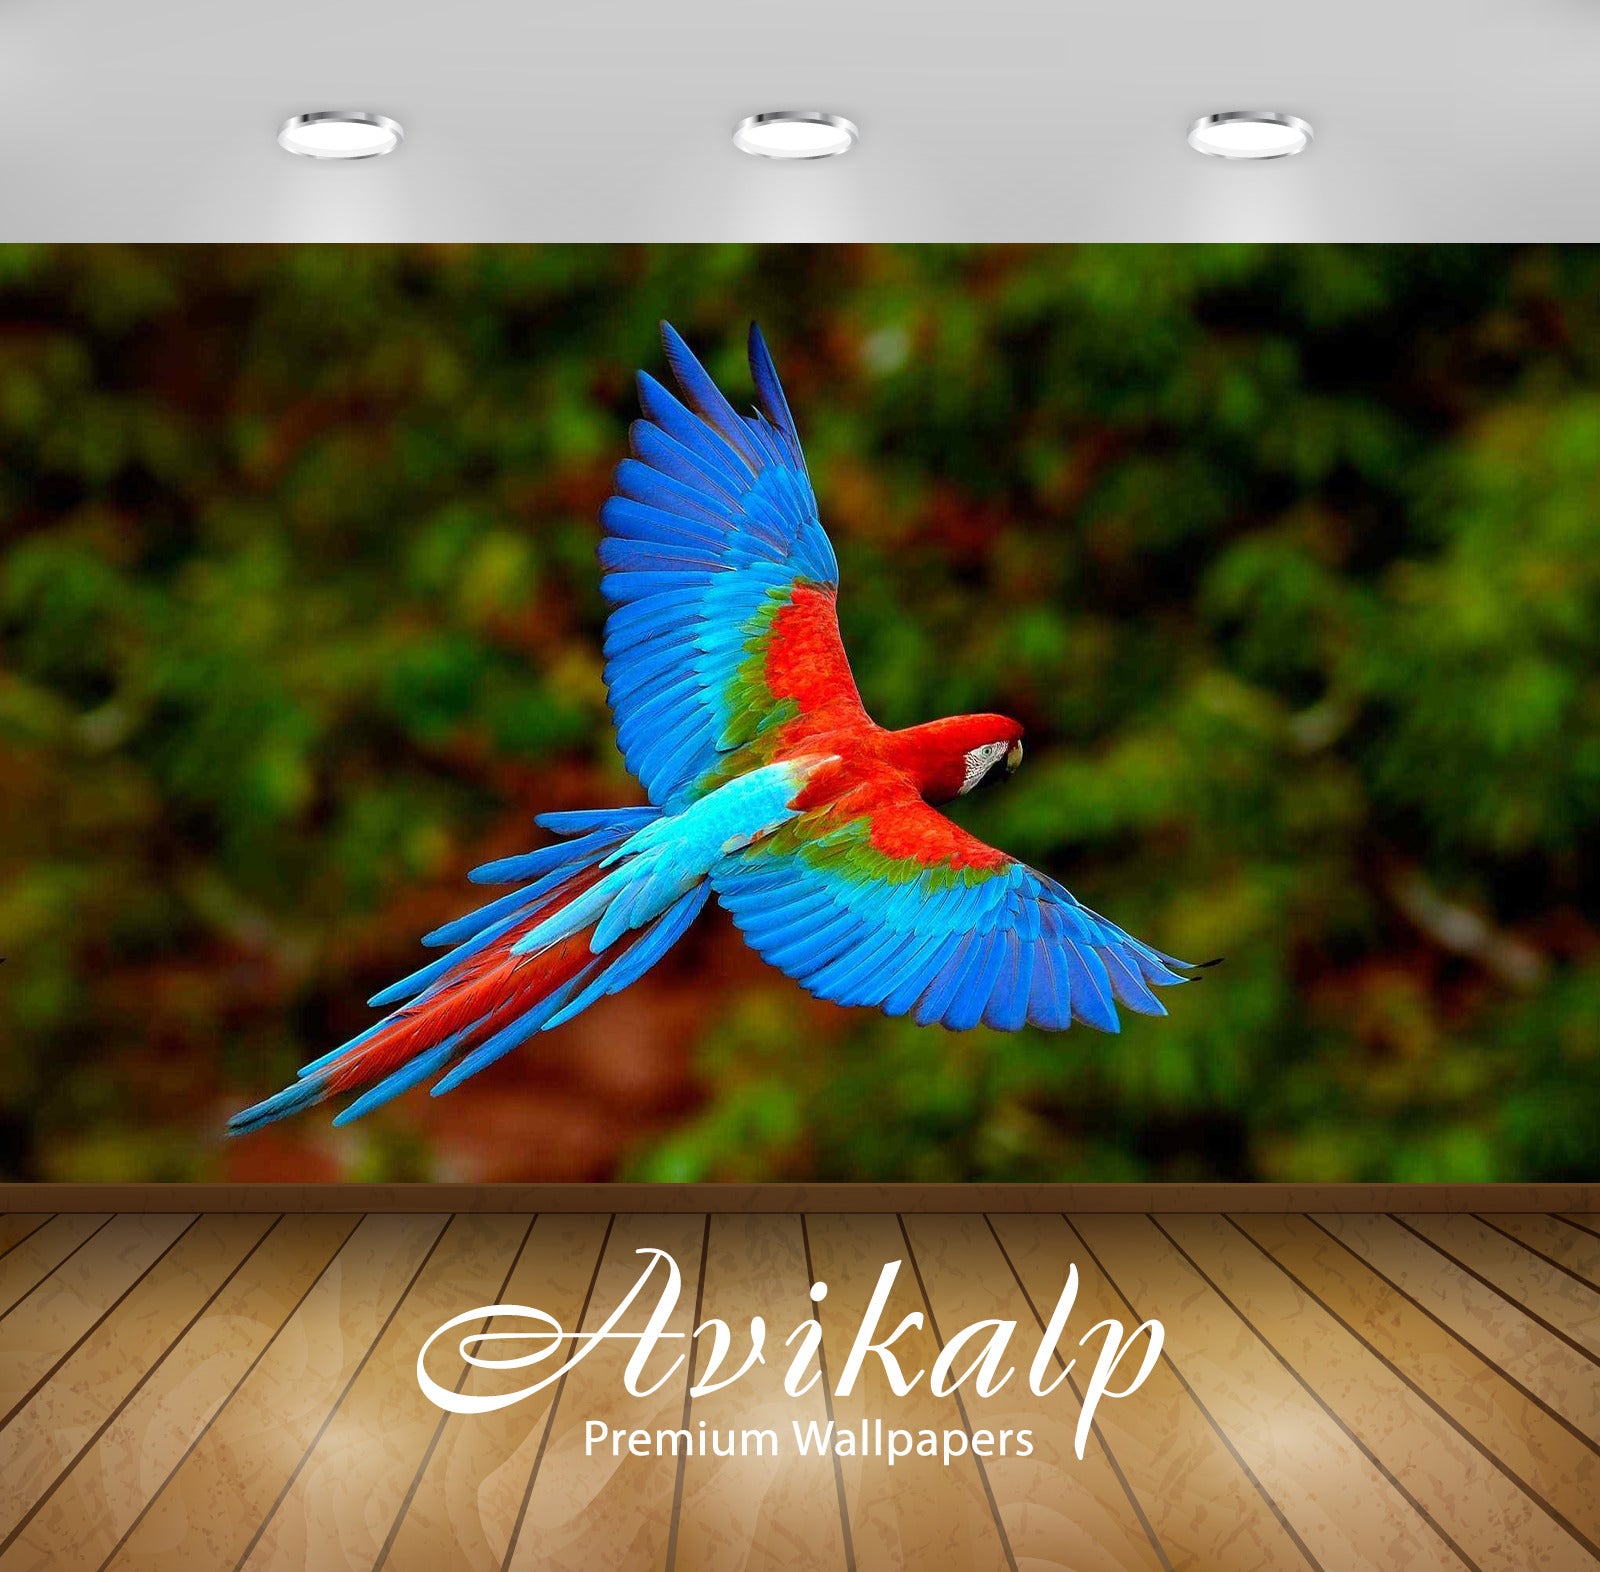 Avikalp Exclusive Kingfisher AWI1145 HD Wallpapers for Living room, Hall, Kids Room, Kitchen, TV Bac